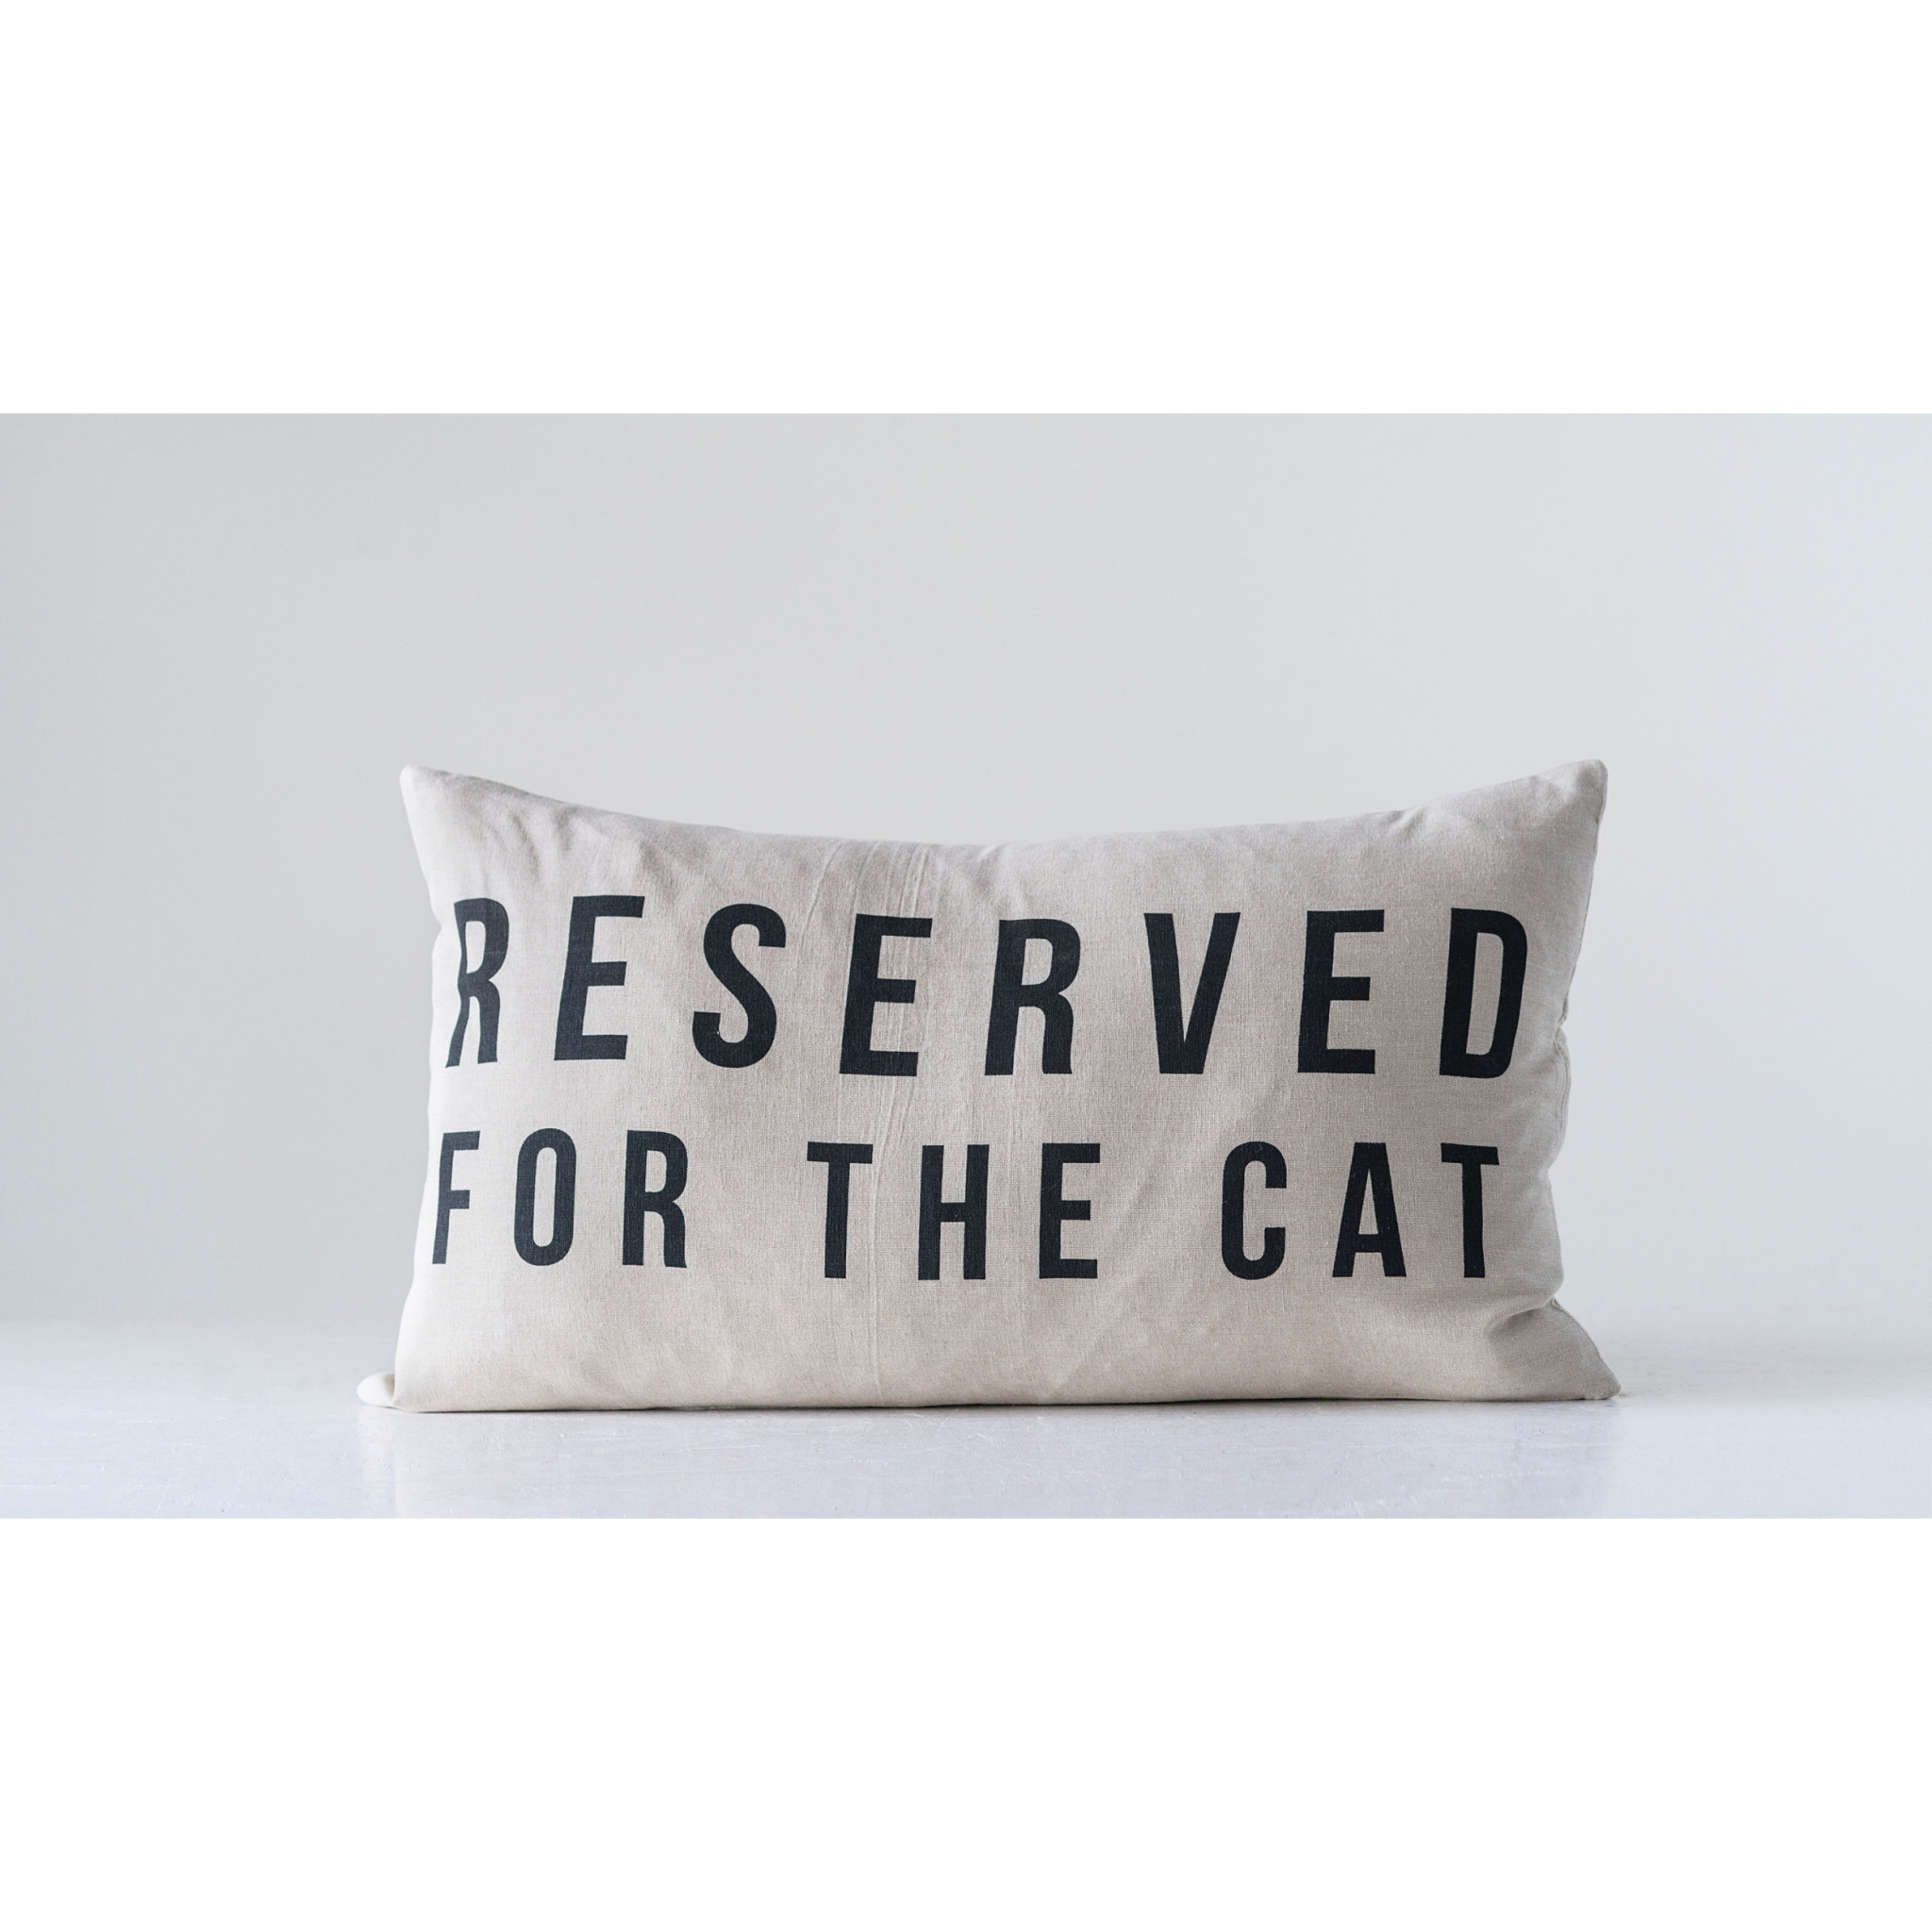 "Reserved For The Cat" Pillow